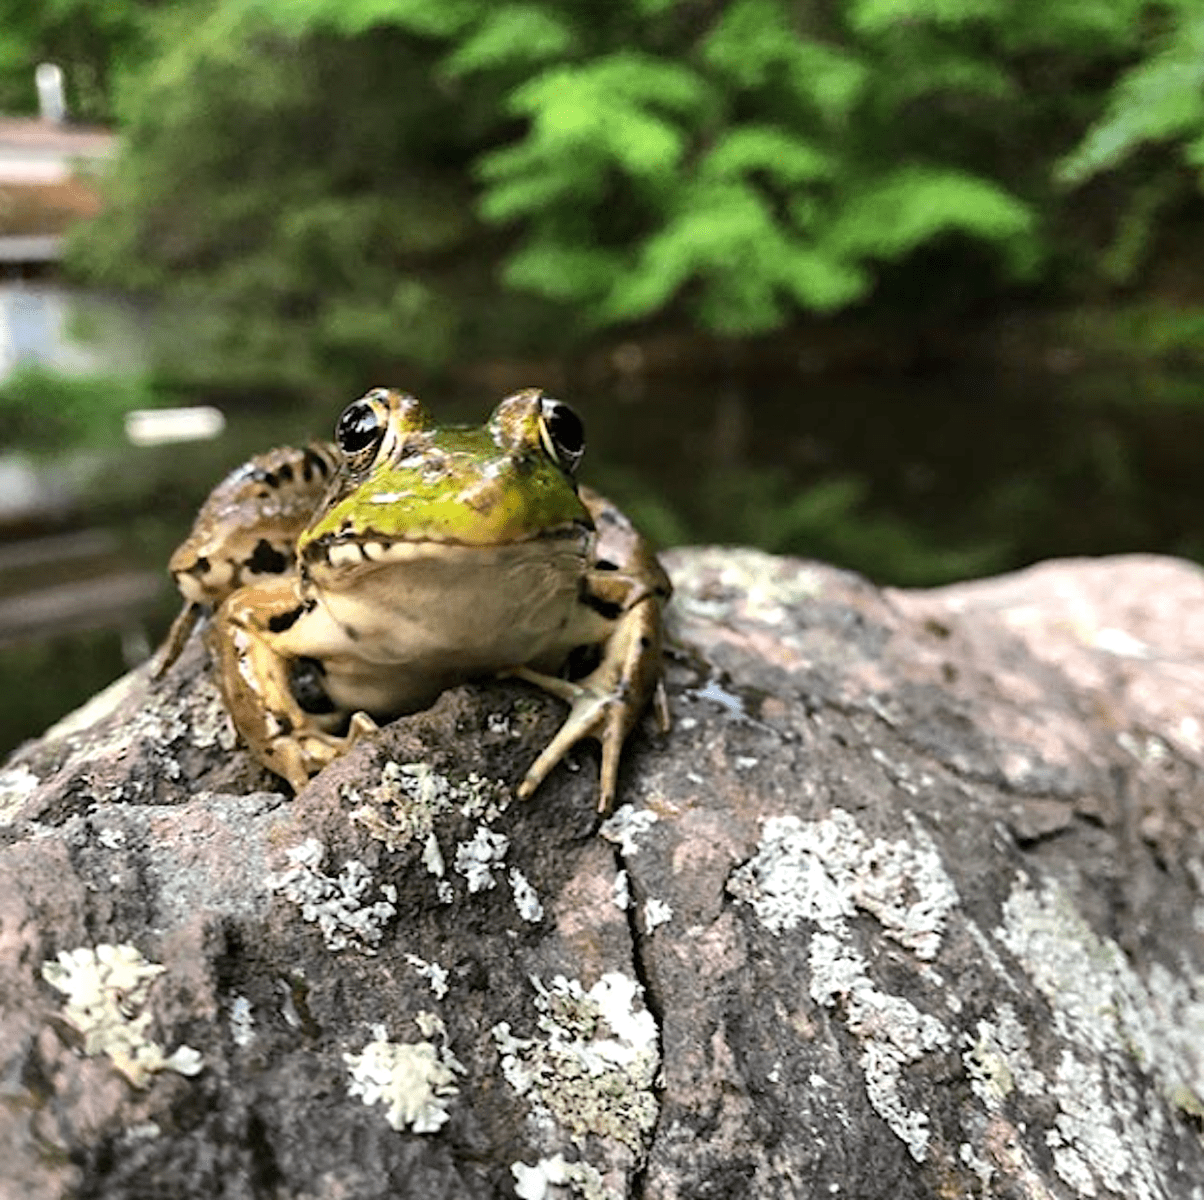 Frog on a rock.